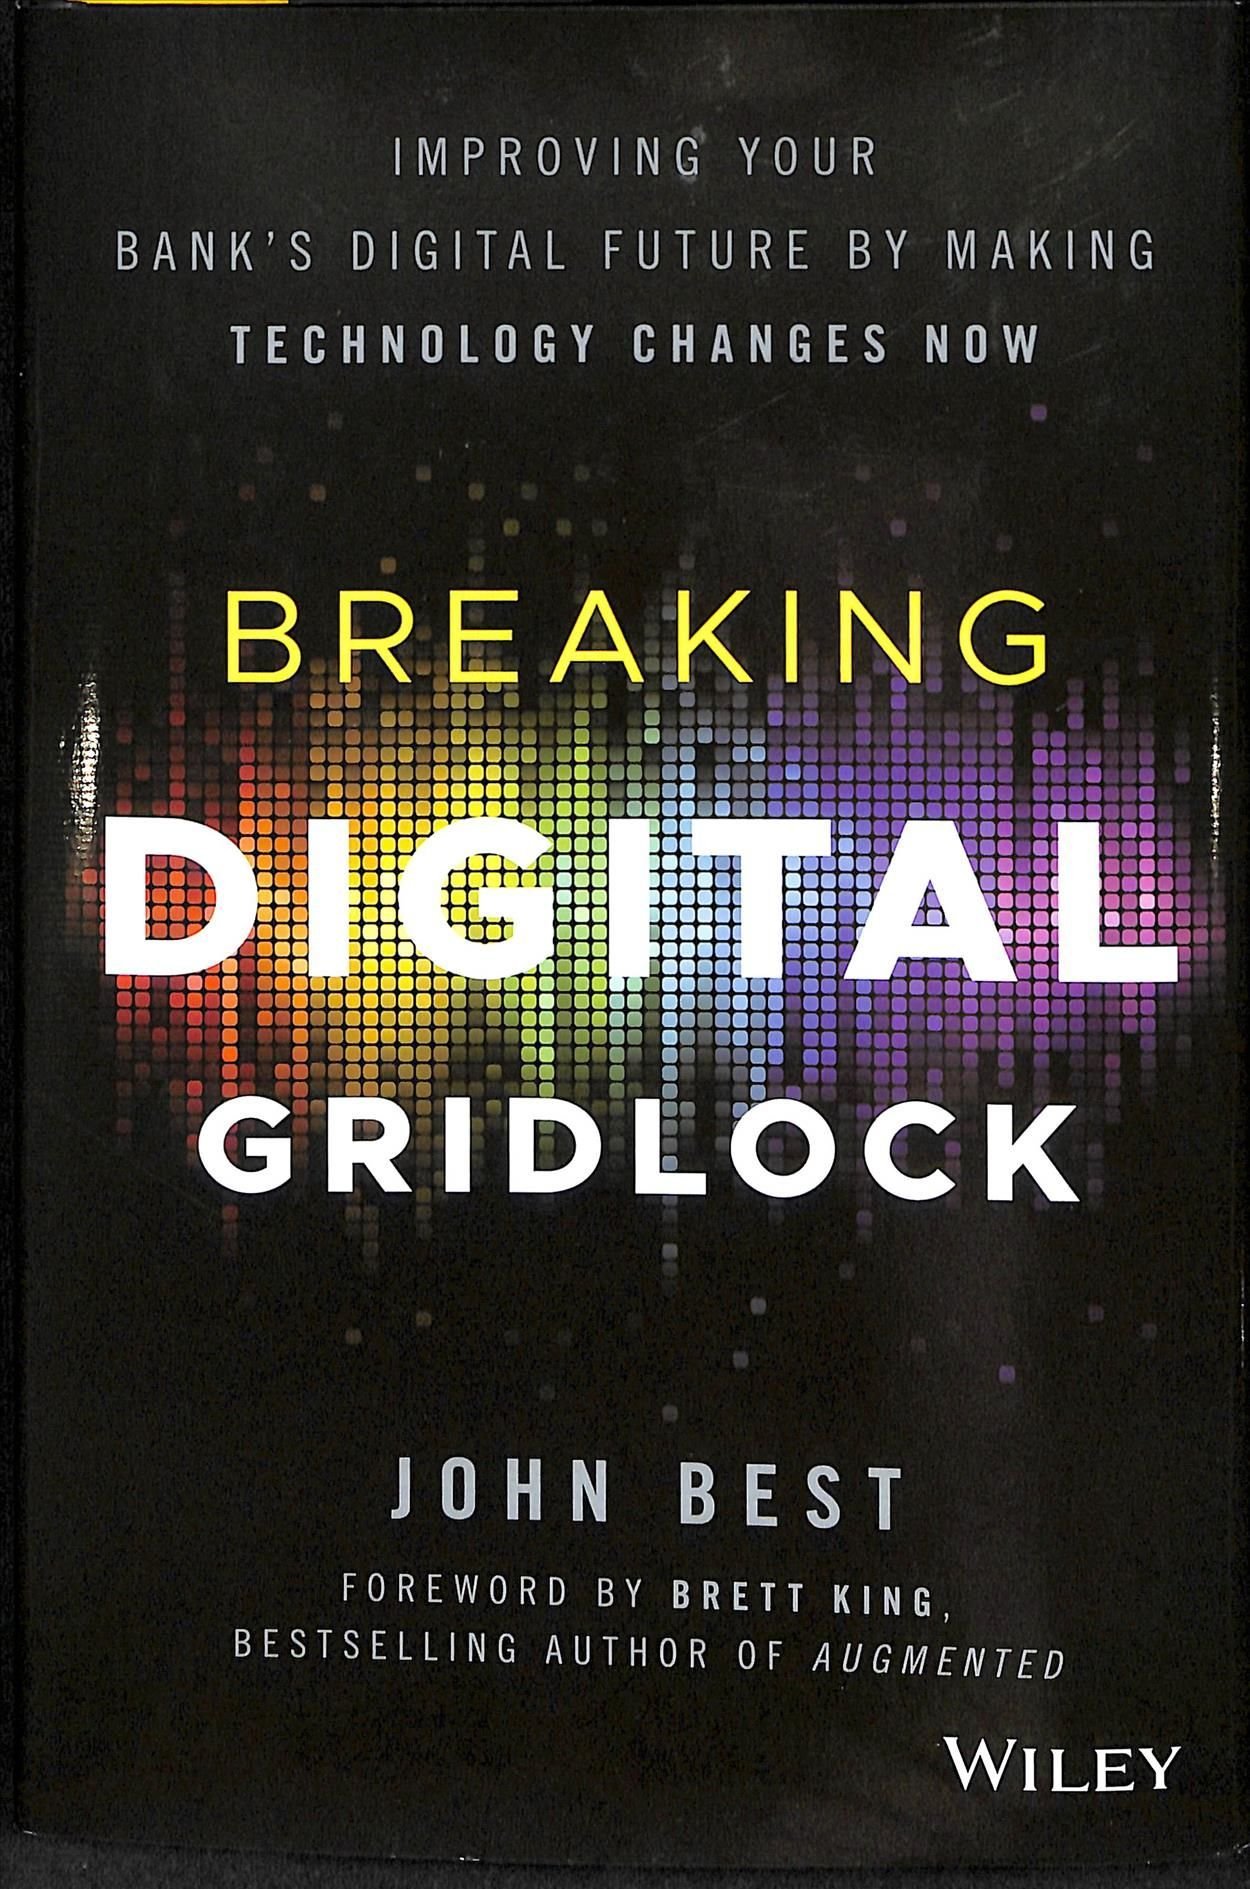 Breaking Digital Gridlock + Website - Improving Your Bank's Digital Future by Making Technology Changes Now